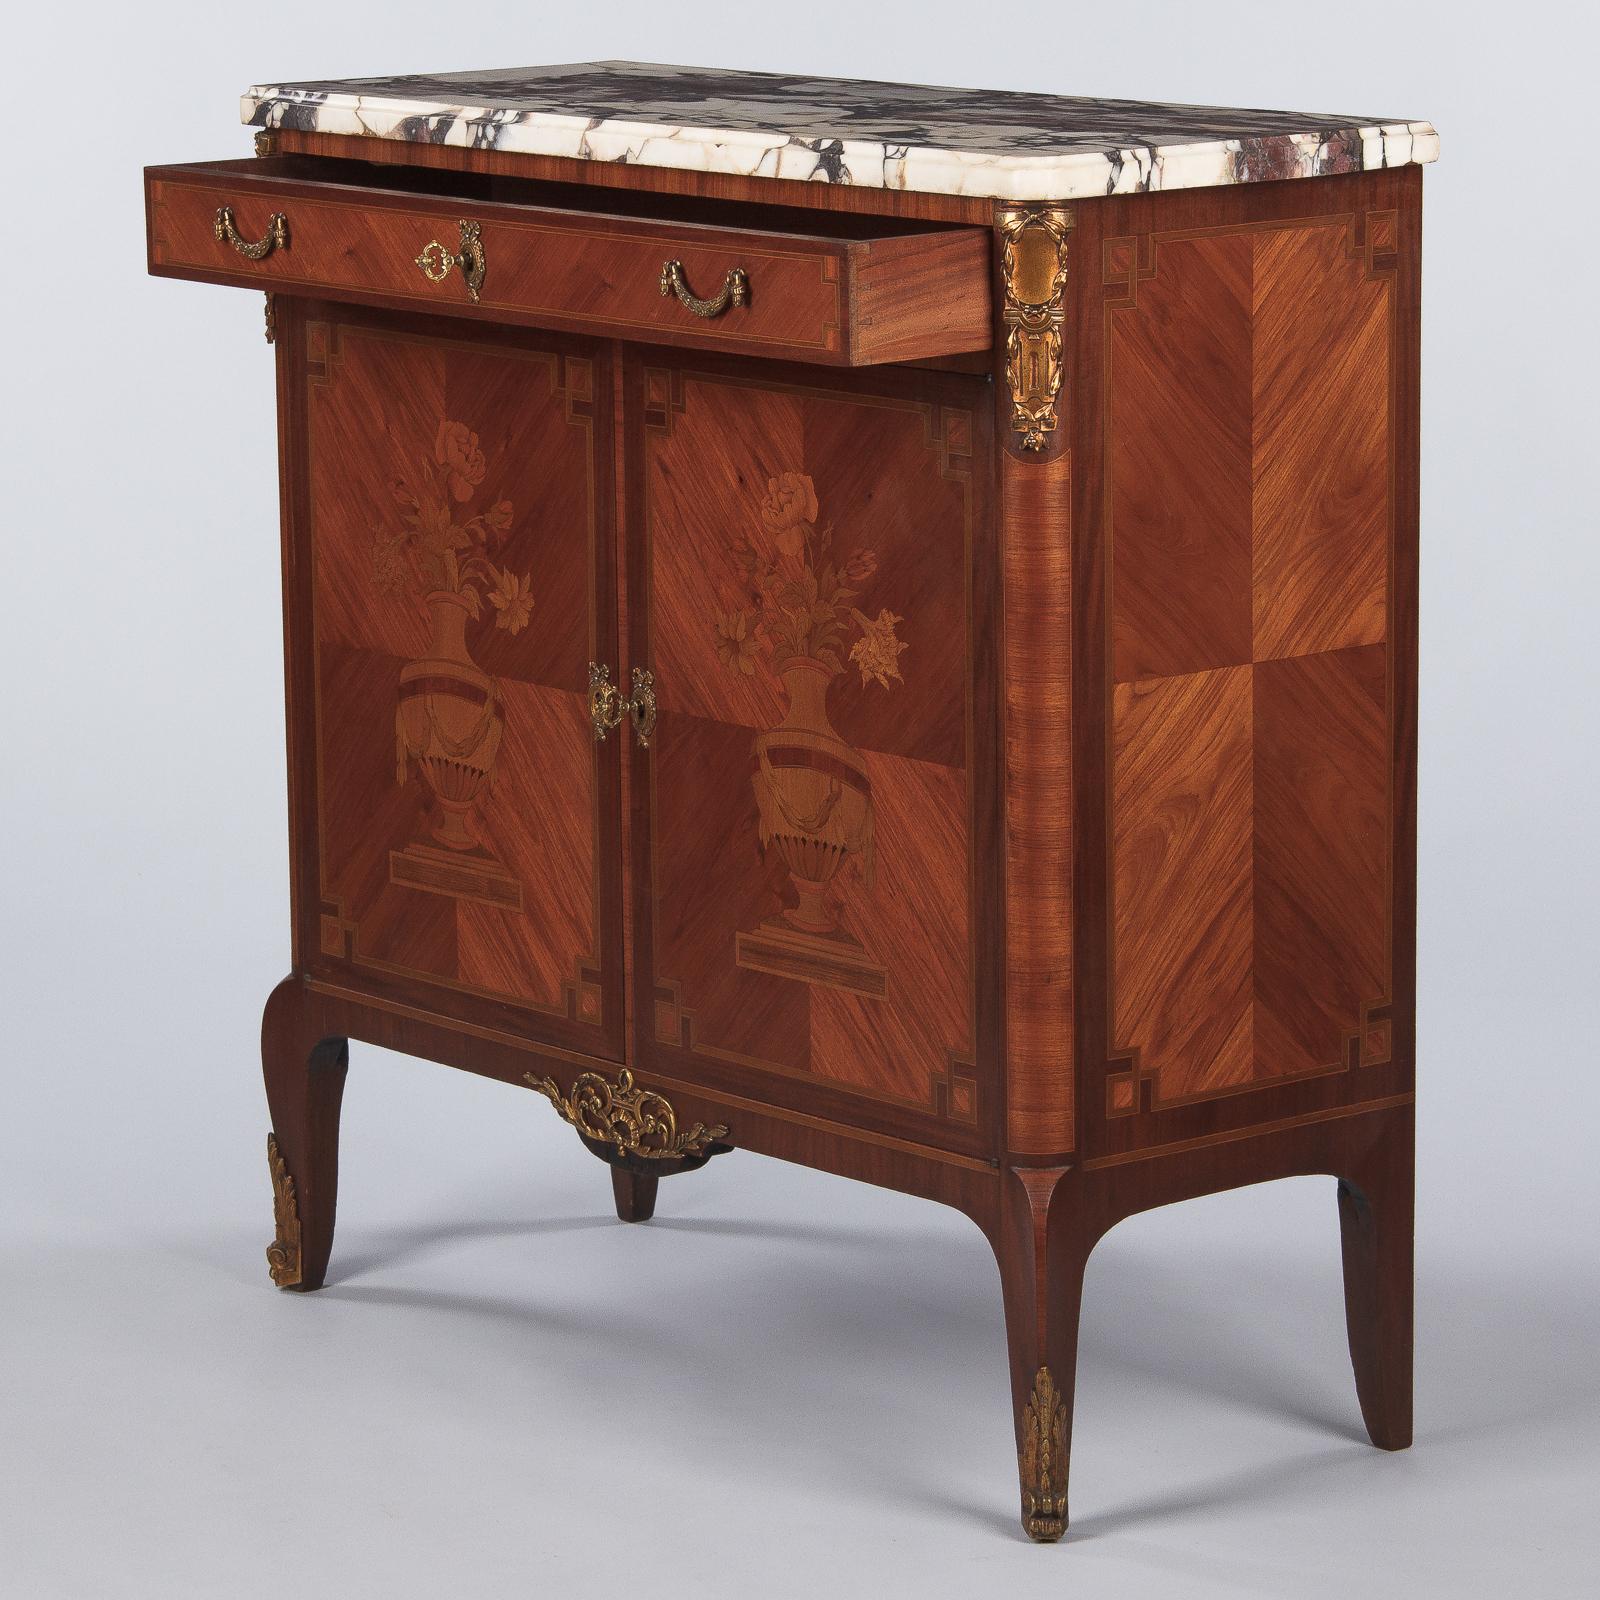 French Transition Style Marquetry Sideboard with Marble Top, 1900s (Obstholz)